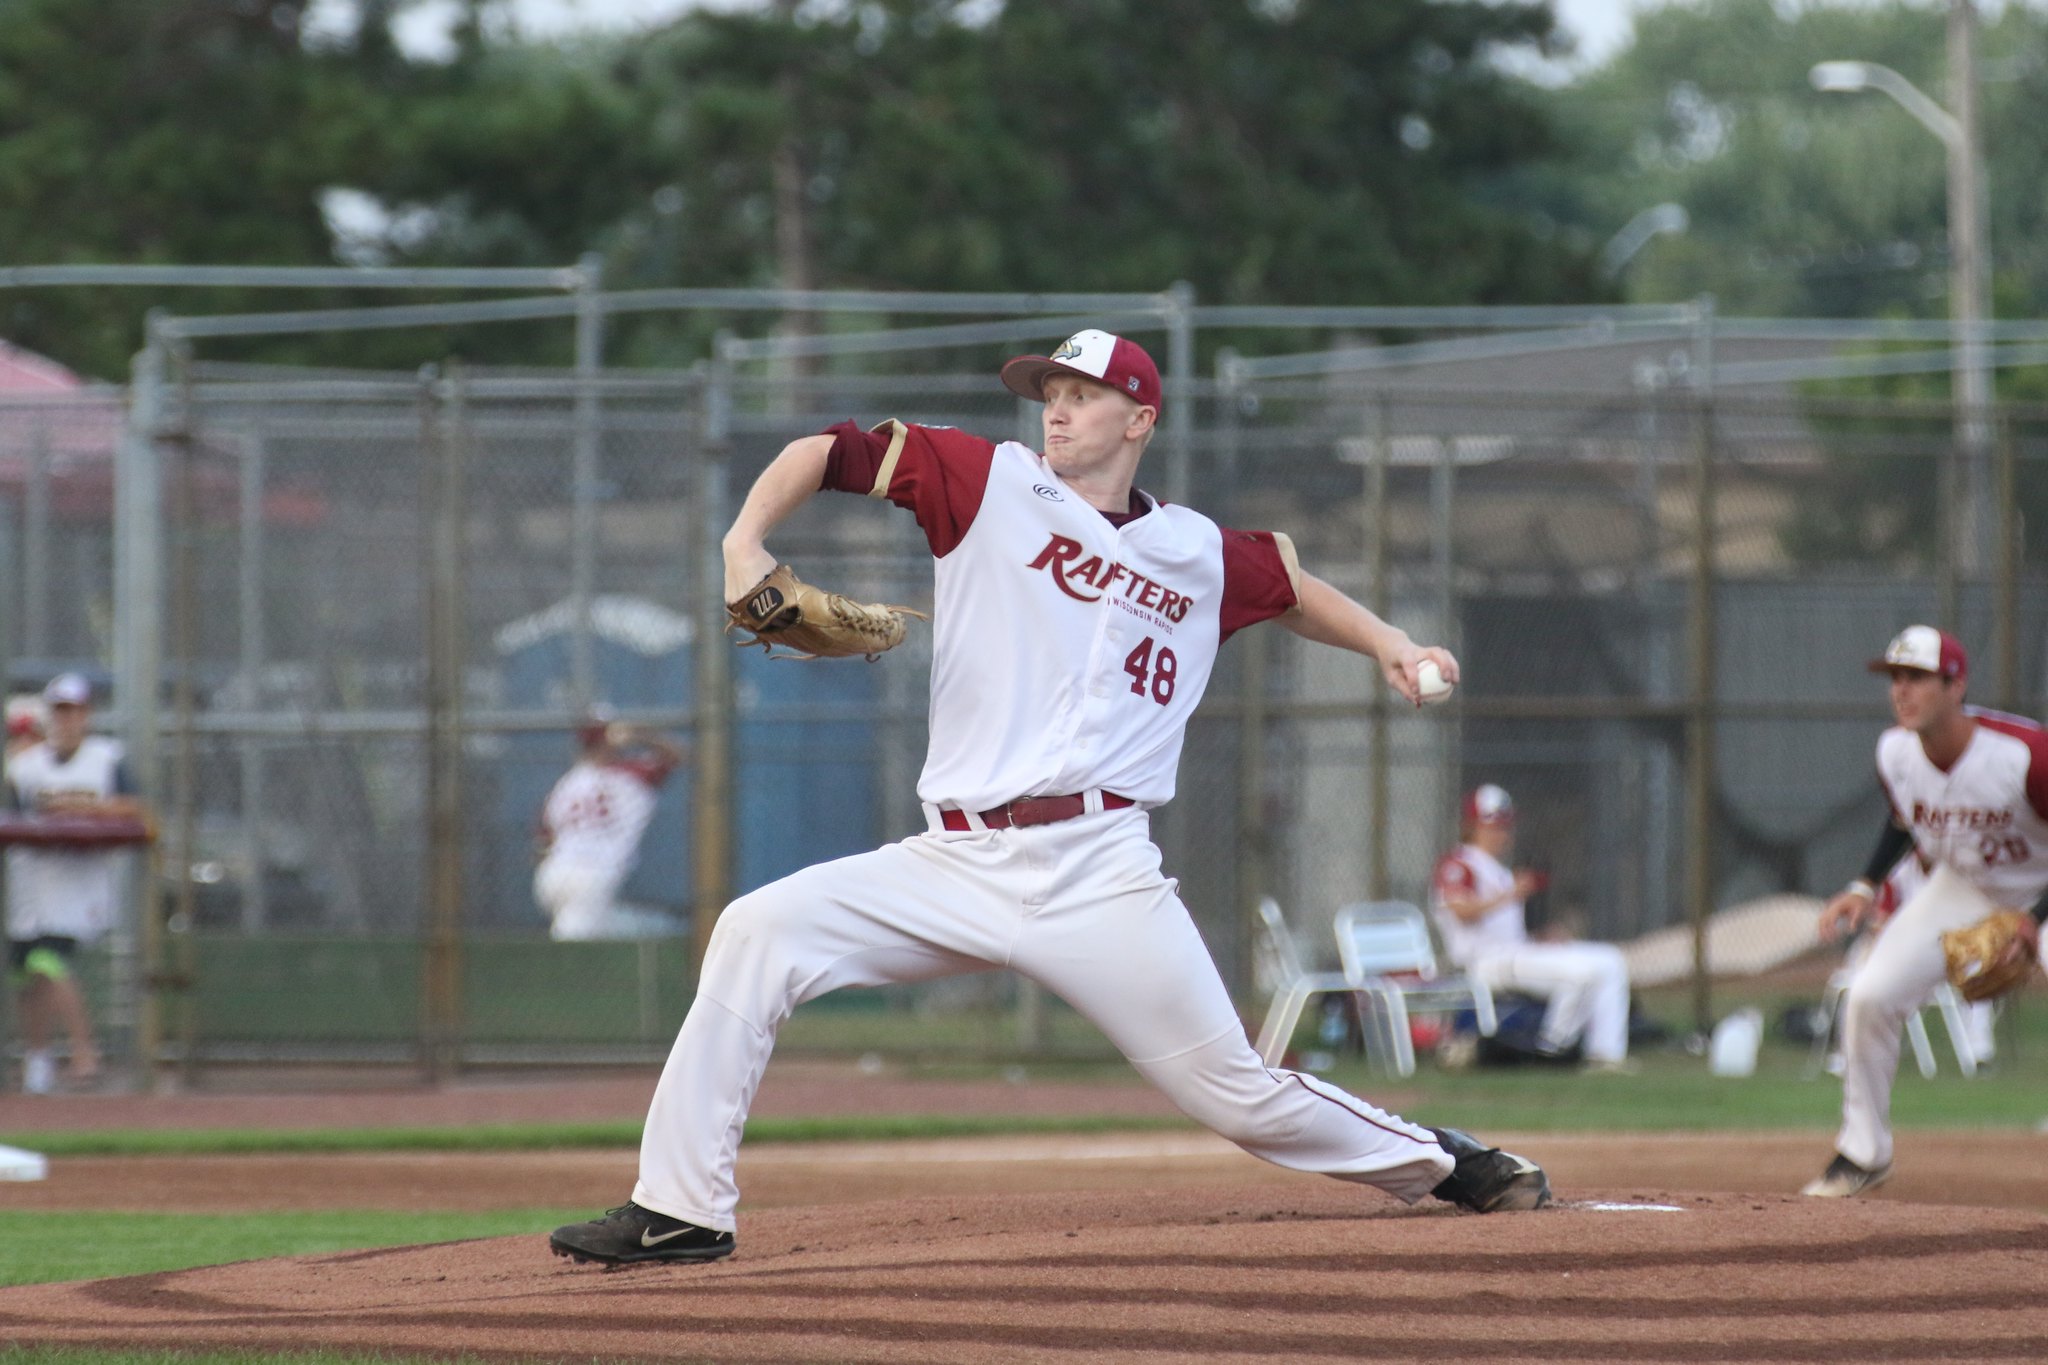 Rafters Stroh Capitalizes on Opportunities in Baseball Career ...